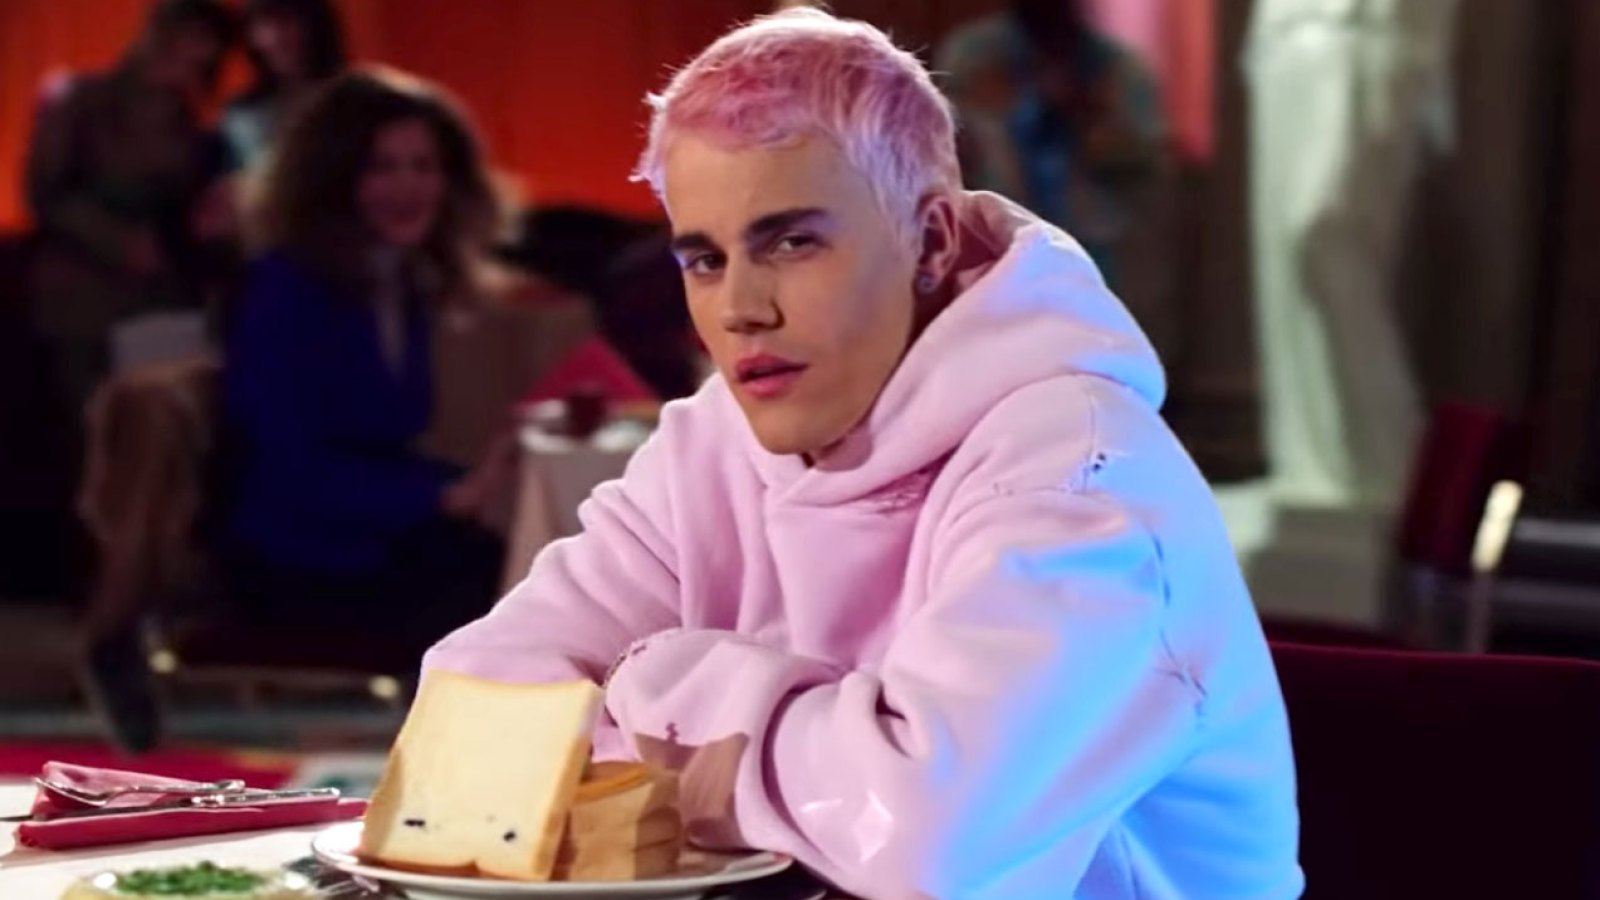 Justin Bieber Releases Music Video for Hailey Baldwin-Inspired Song 'Yummy'